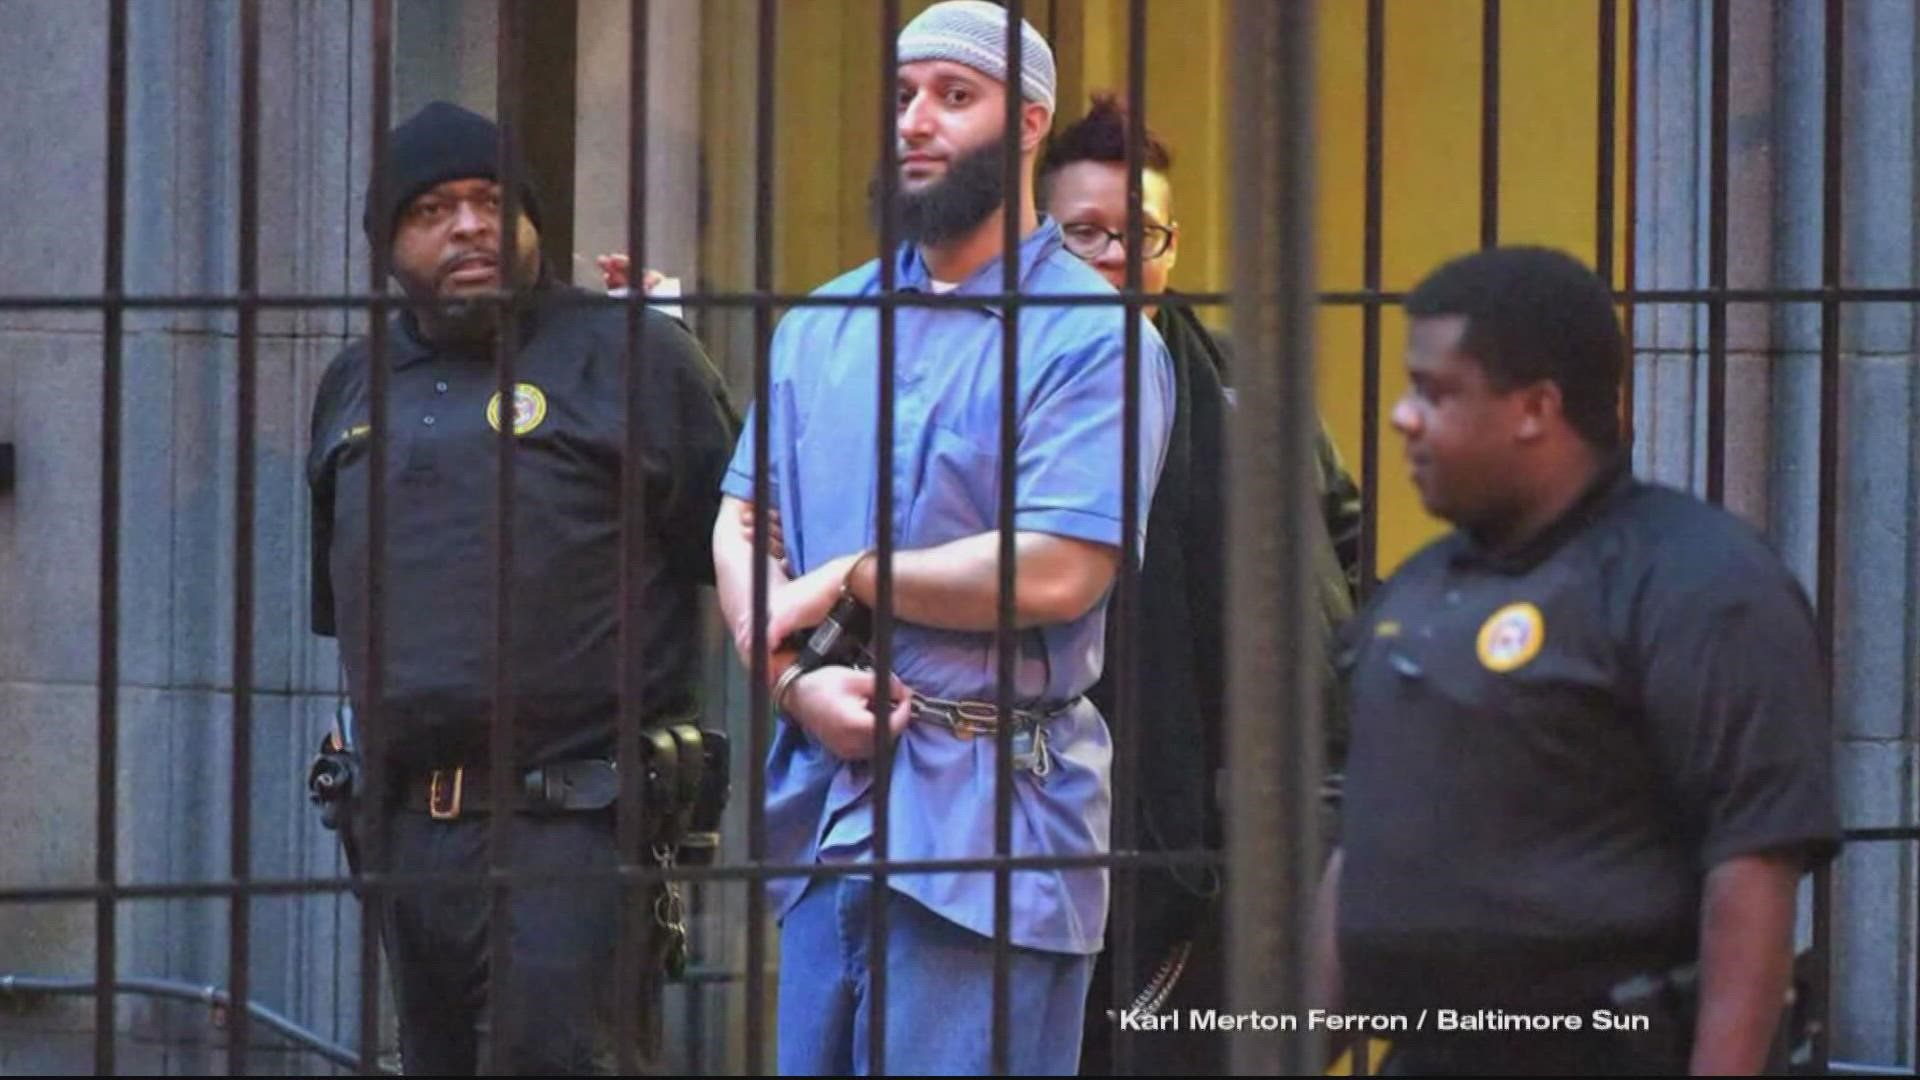 A Baltimore judge on Monday ordered the release of Adnan Syed after overturning Syed’s conviction for the 1999 murder of Hae Min Lee